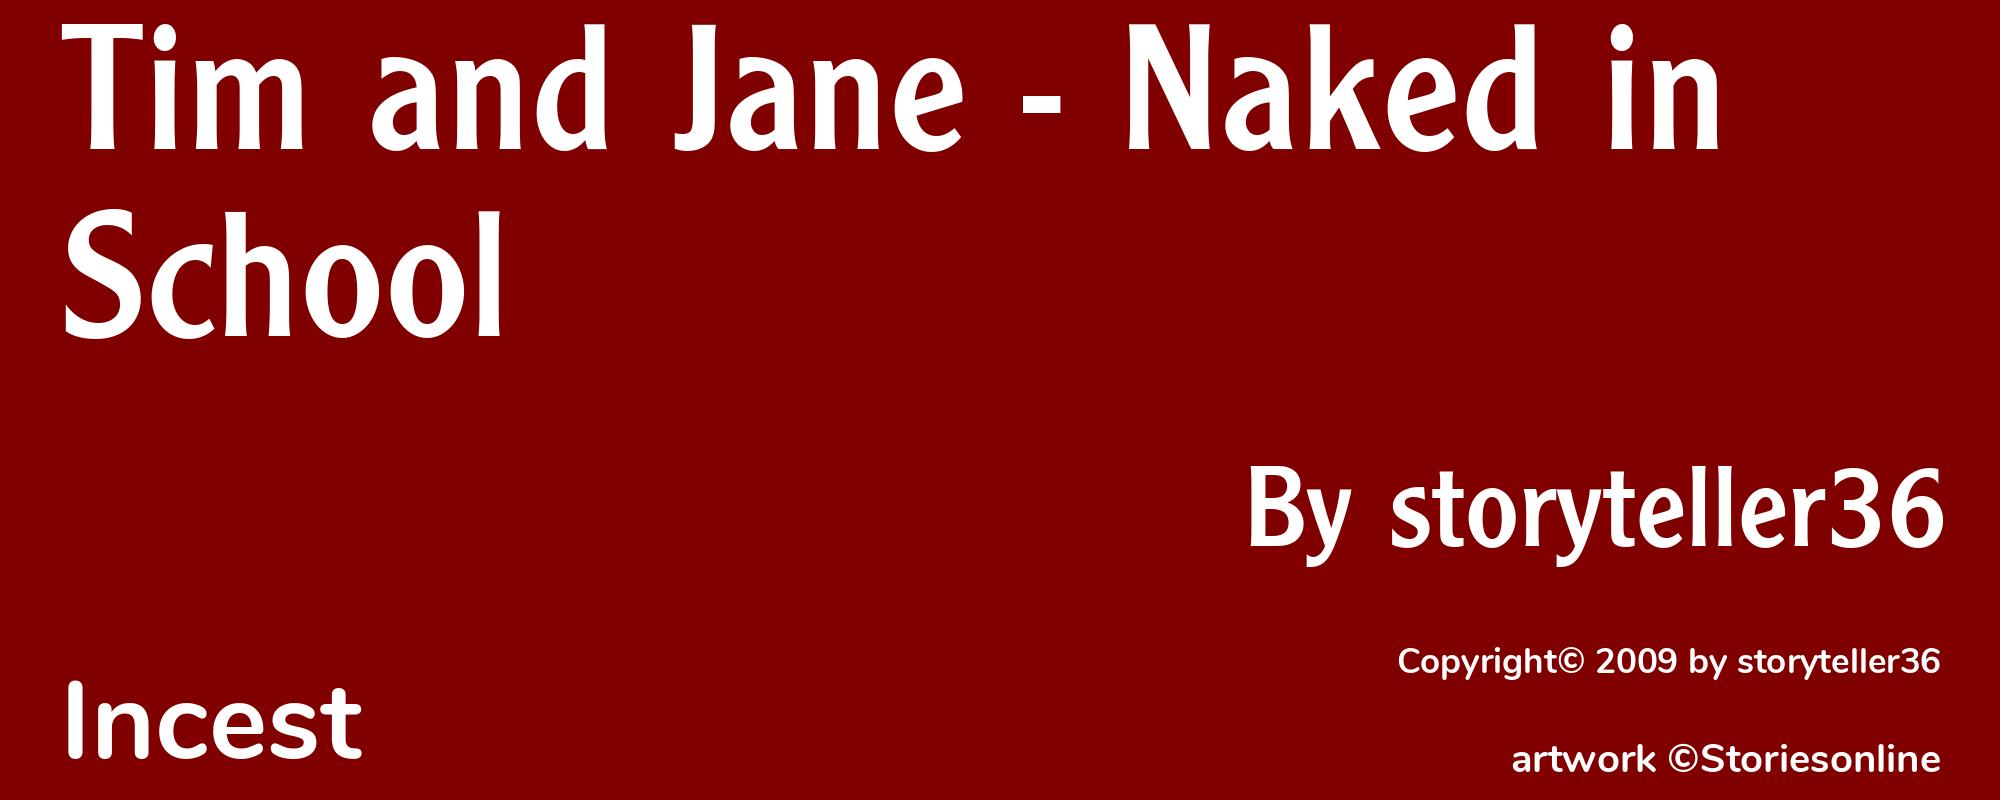 Tim and Jane - Naked in School - Cover